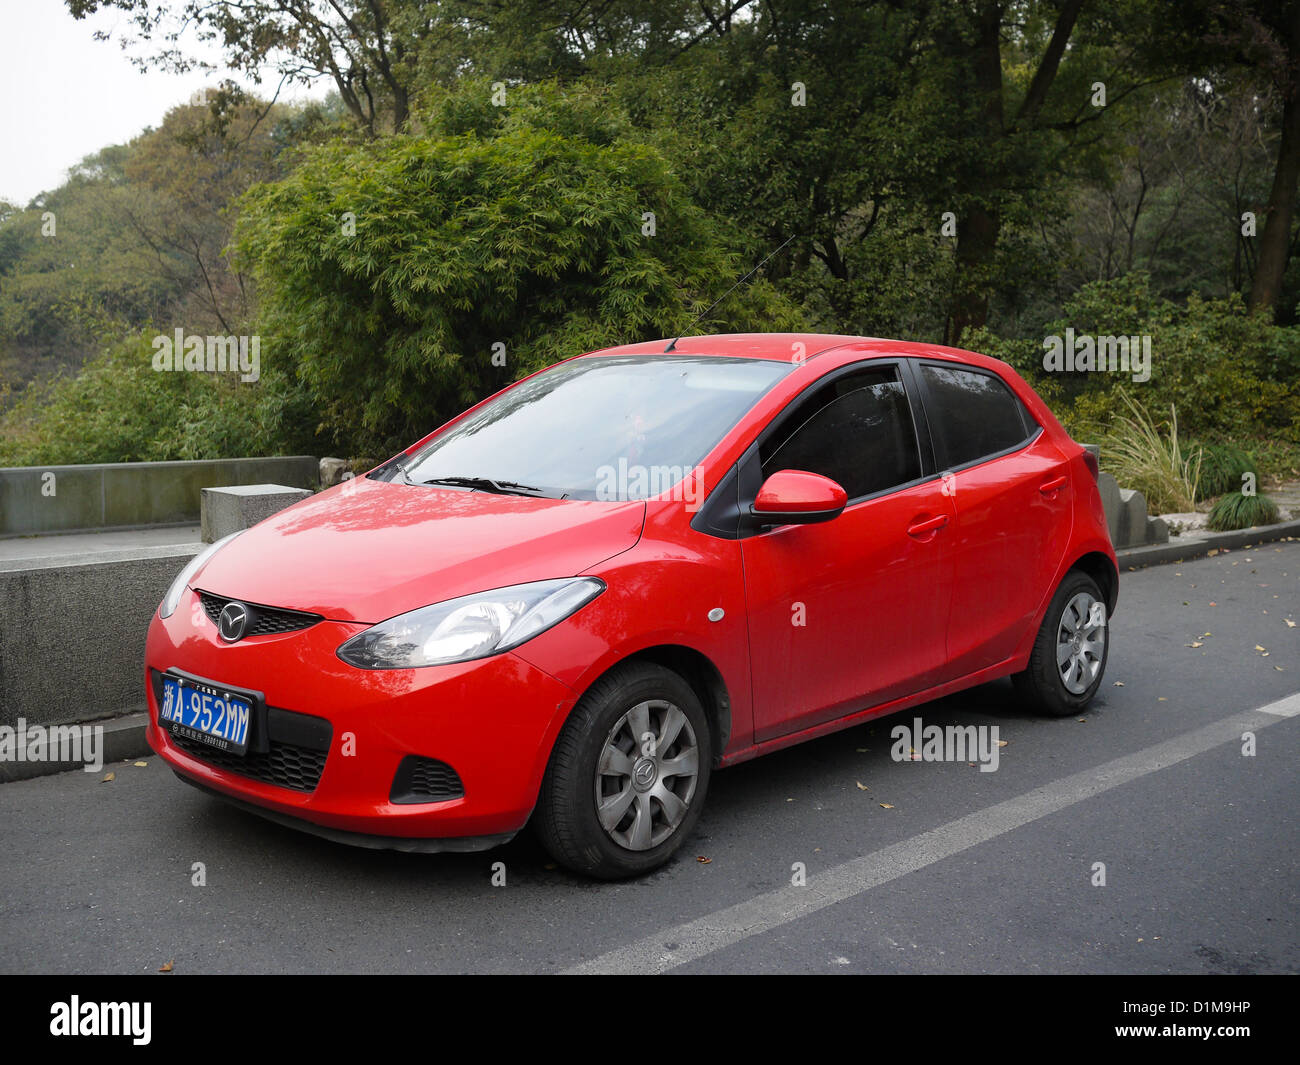 red mazda two 2 compact car China Stock Photo